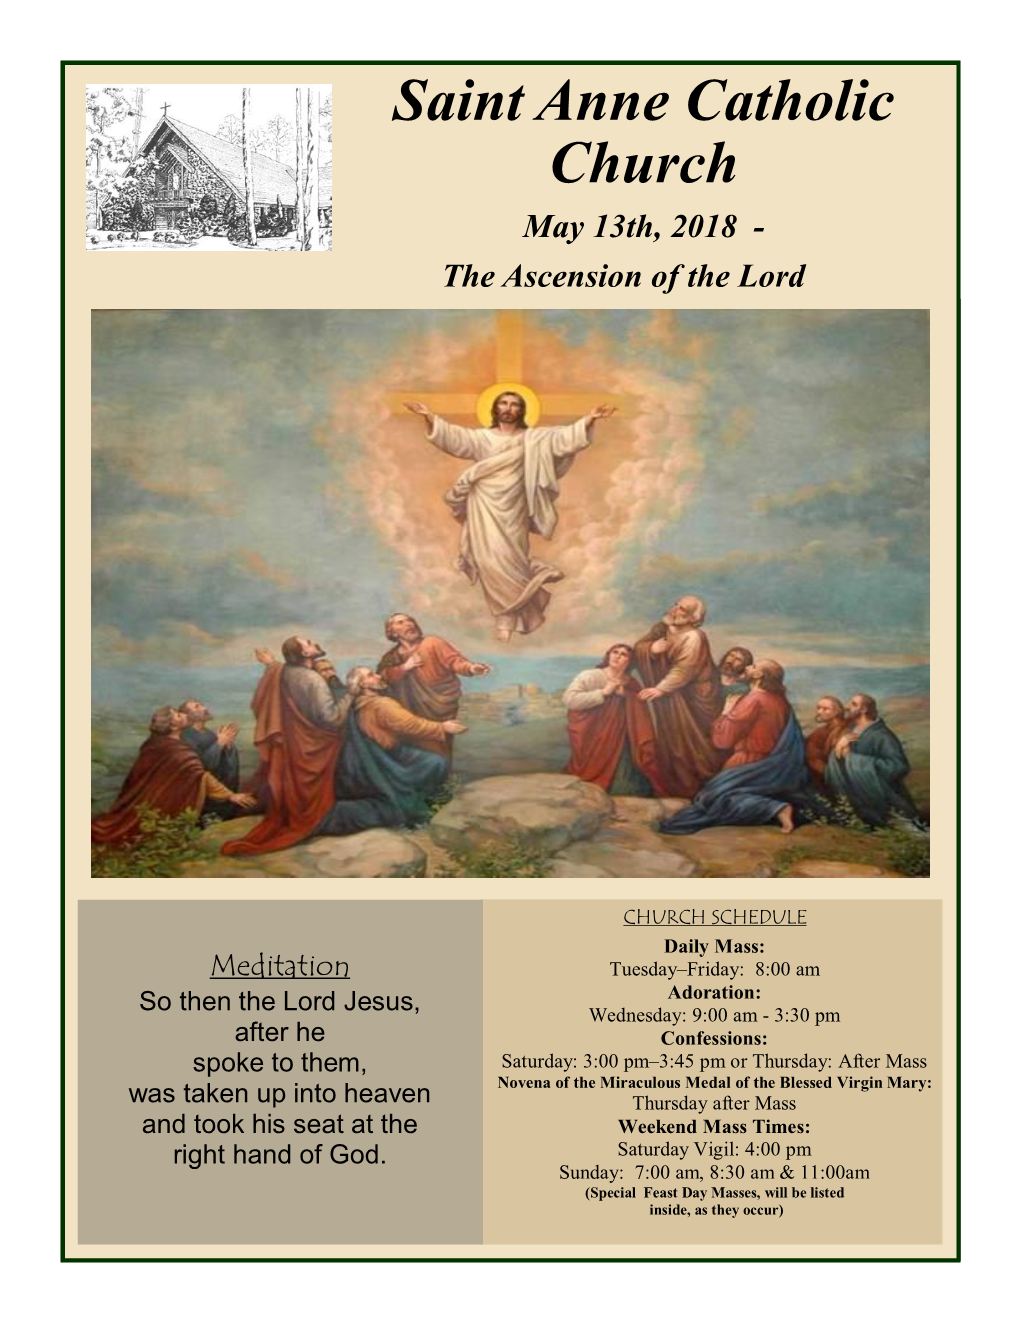 Saint Anne Catholic Church May 13Th, 2018 - the Ascension of the Lord